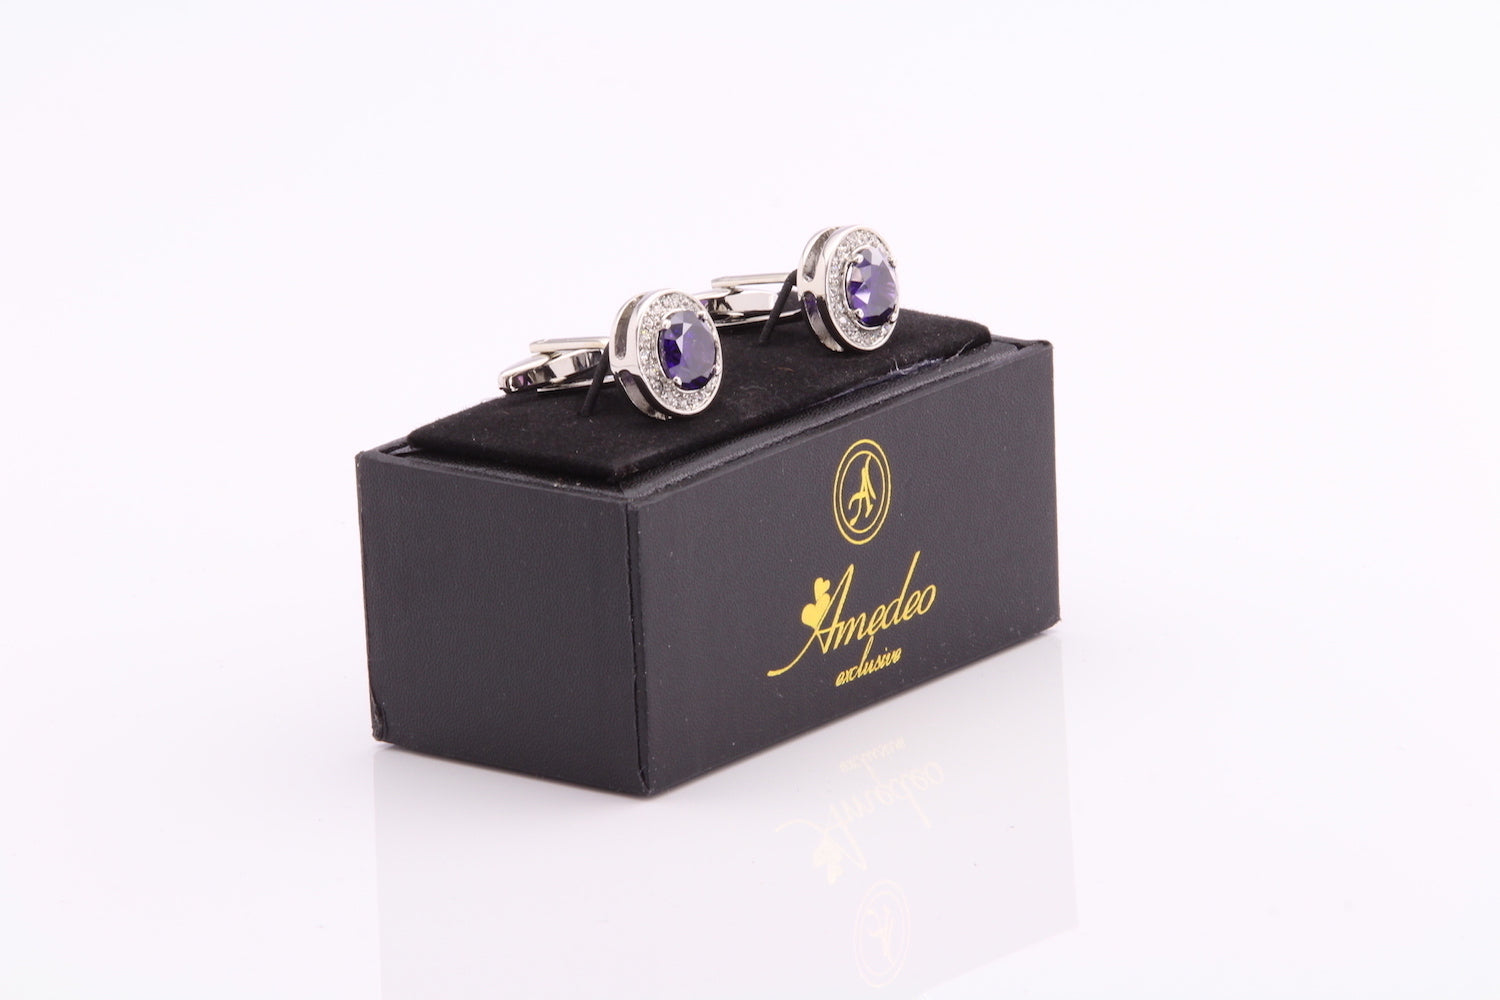 Purple Big Stone Mens Stainless Steel Round Cufflinks for Shirt with Box - Hand Crafted Perfect Gift